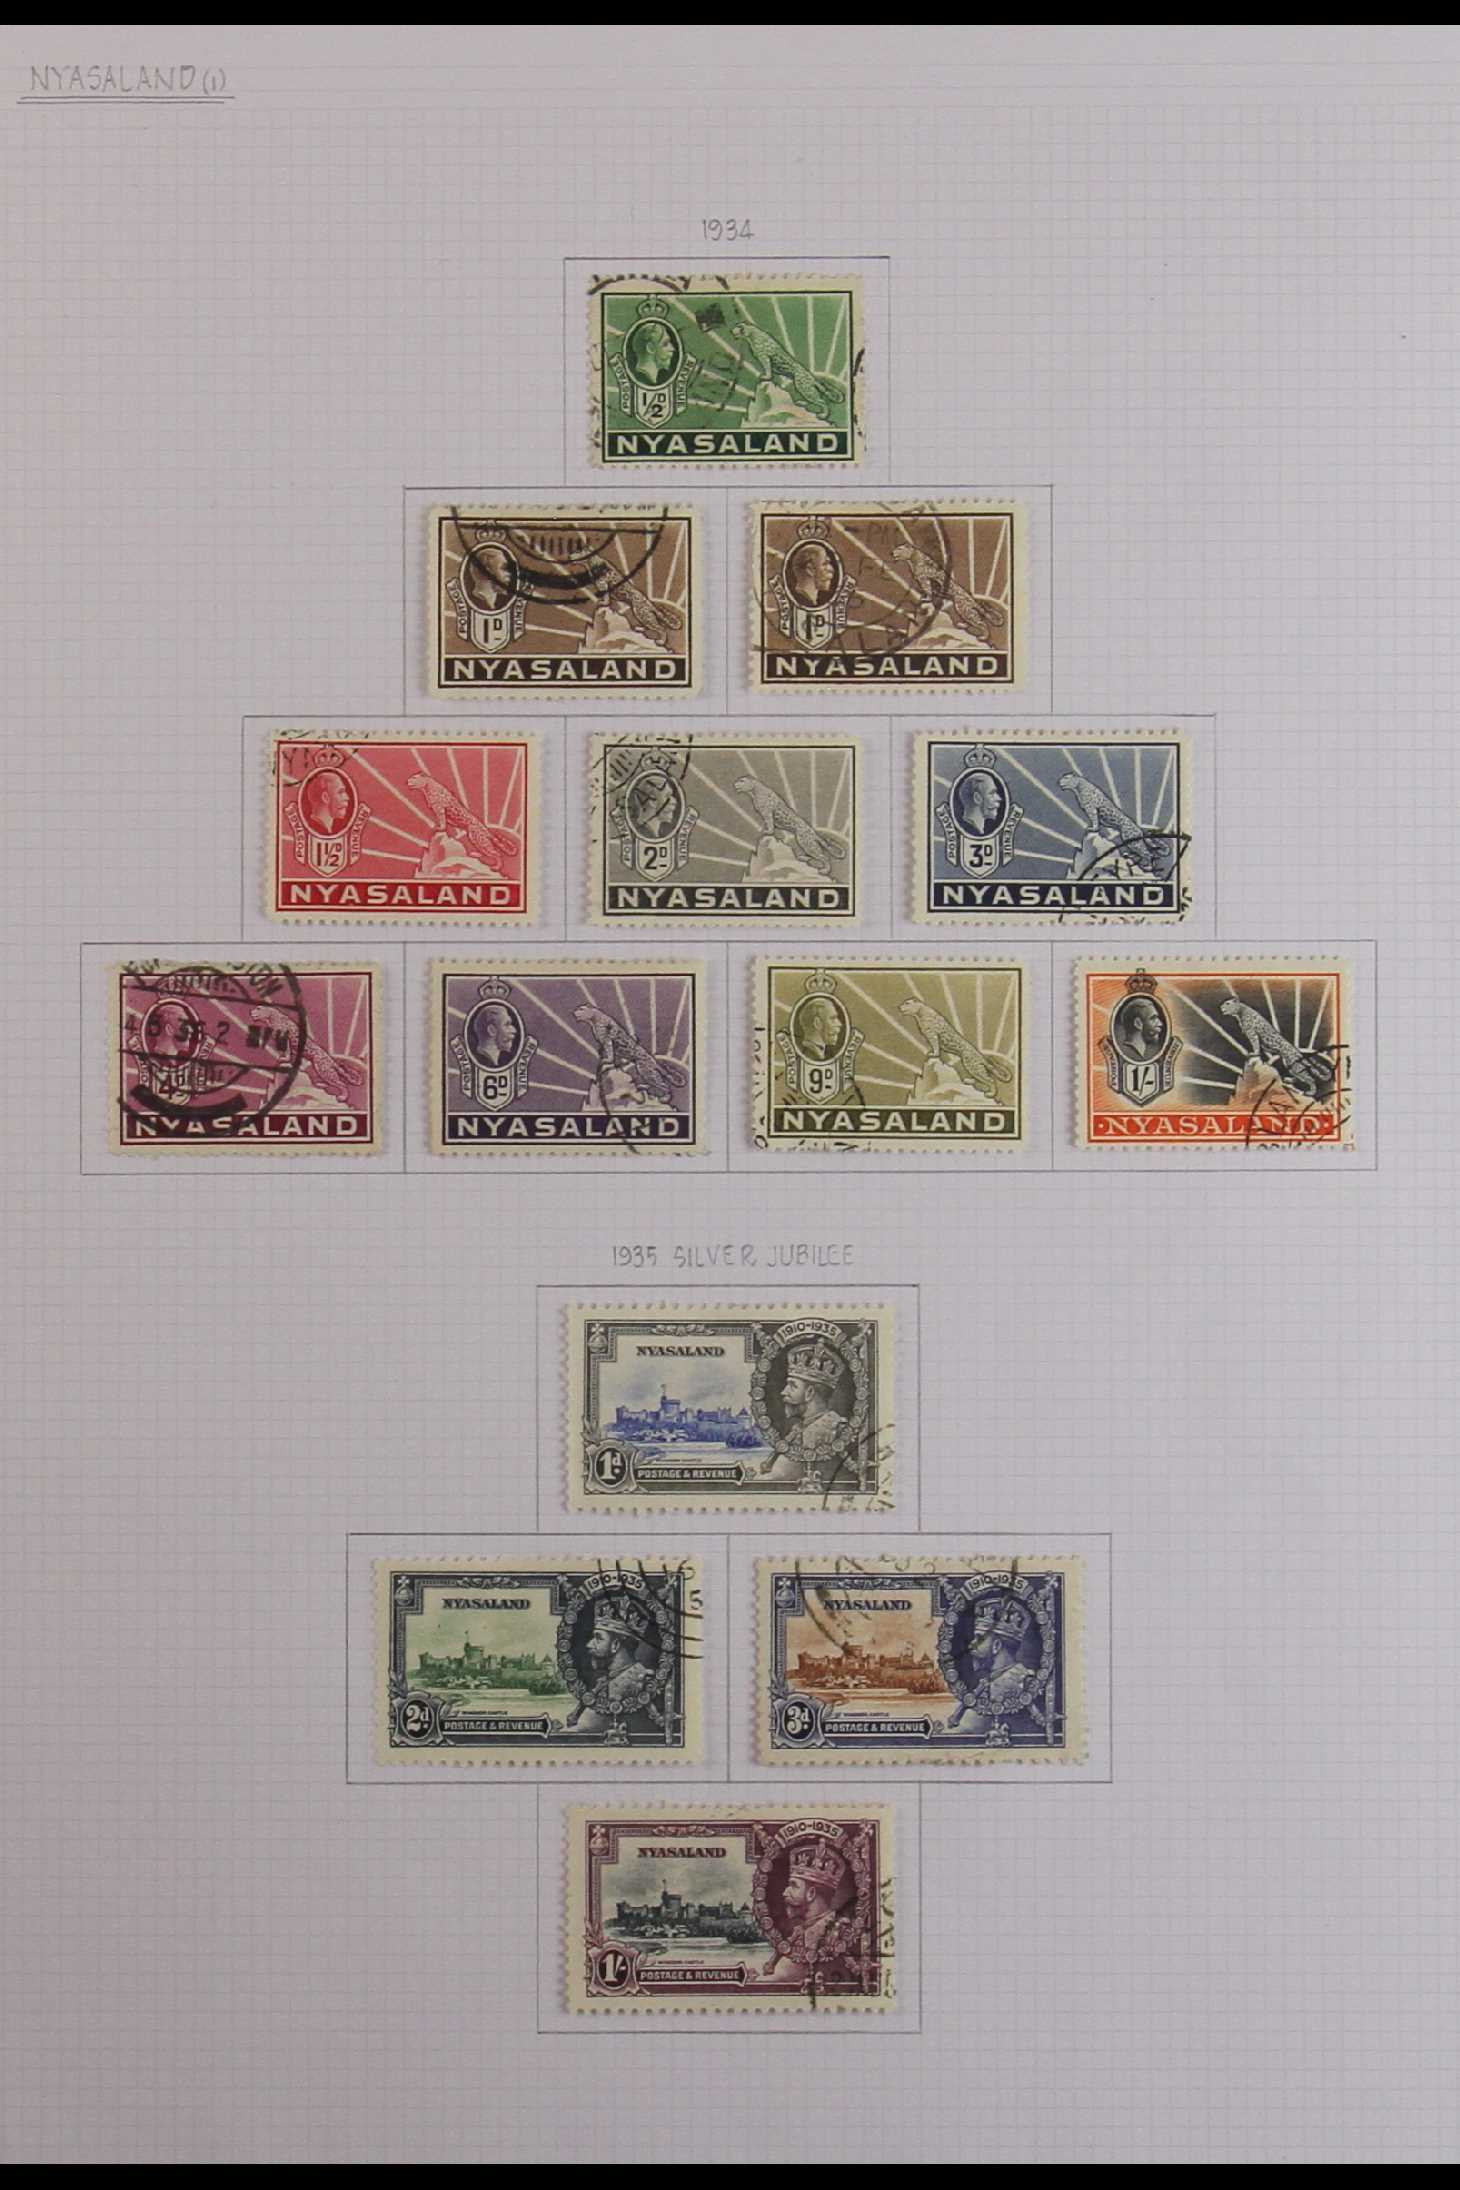 NYASALAND 1934-51 fine used complete basic run from 1934-35 KGV definitive set to 1951 Diamond